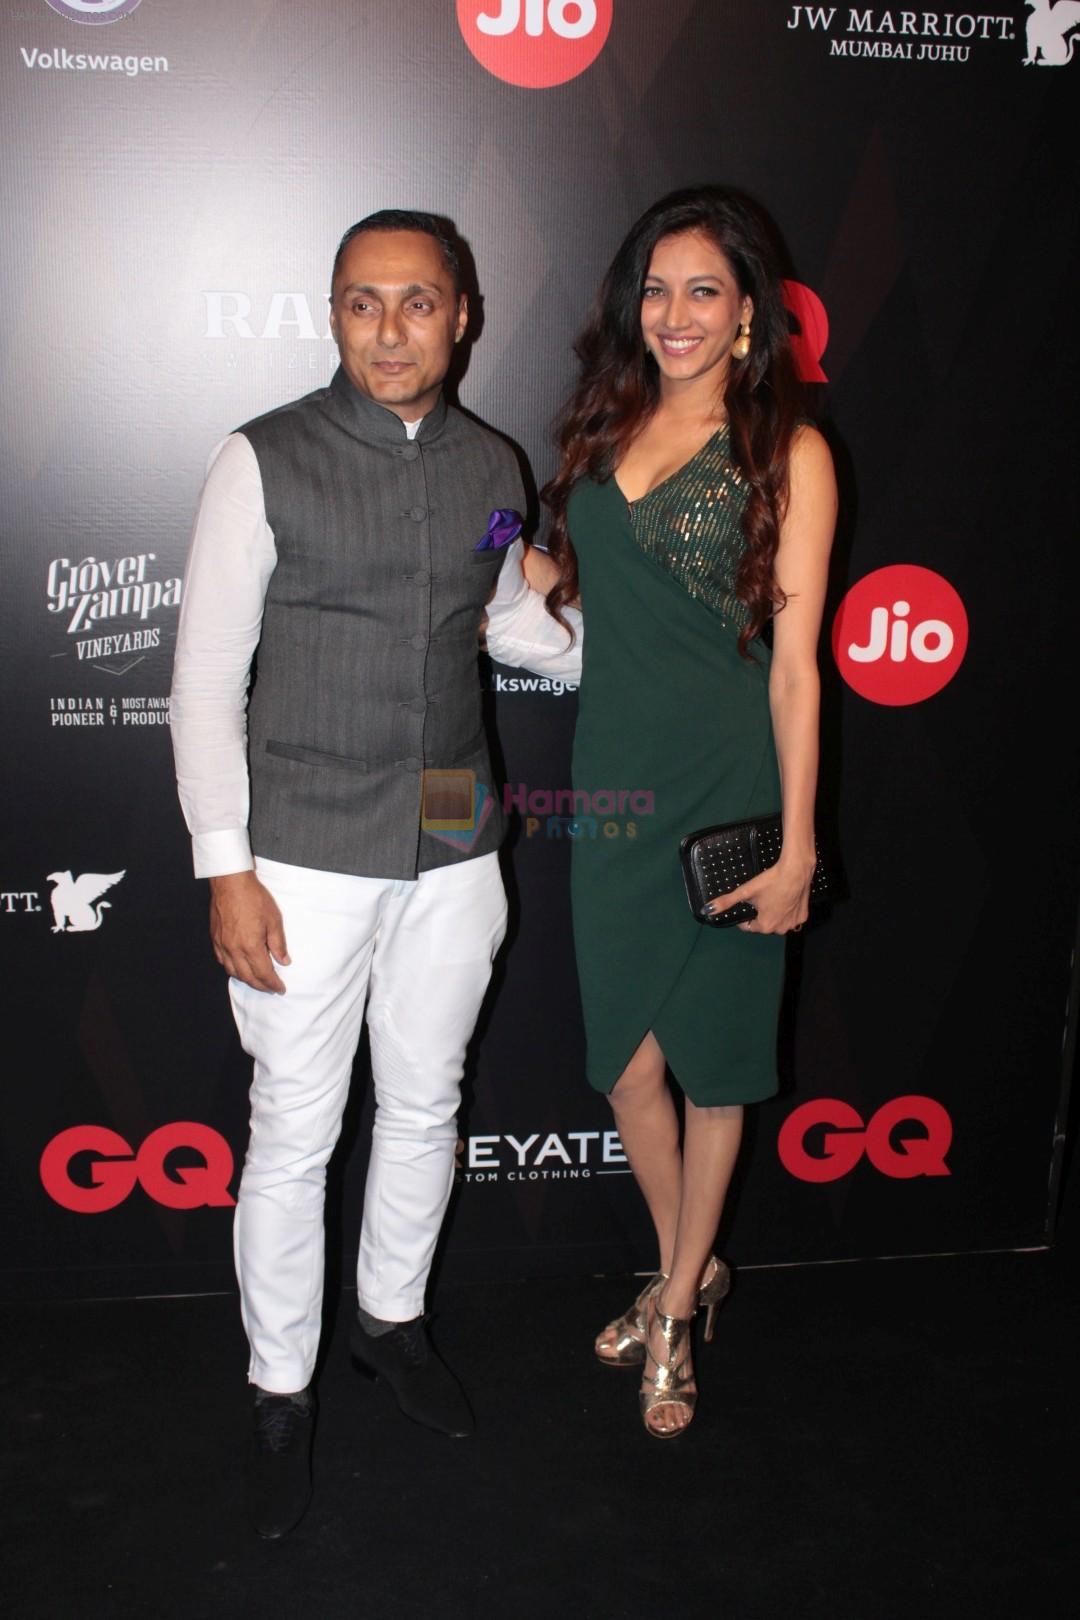 Rahul Bose at Star Studded Red Carpet For GQ Best Dressed 2017 on 4th June 2017